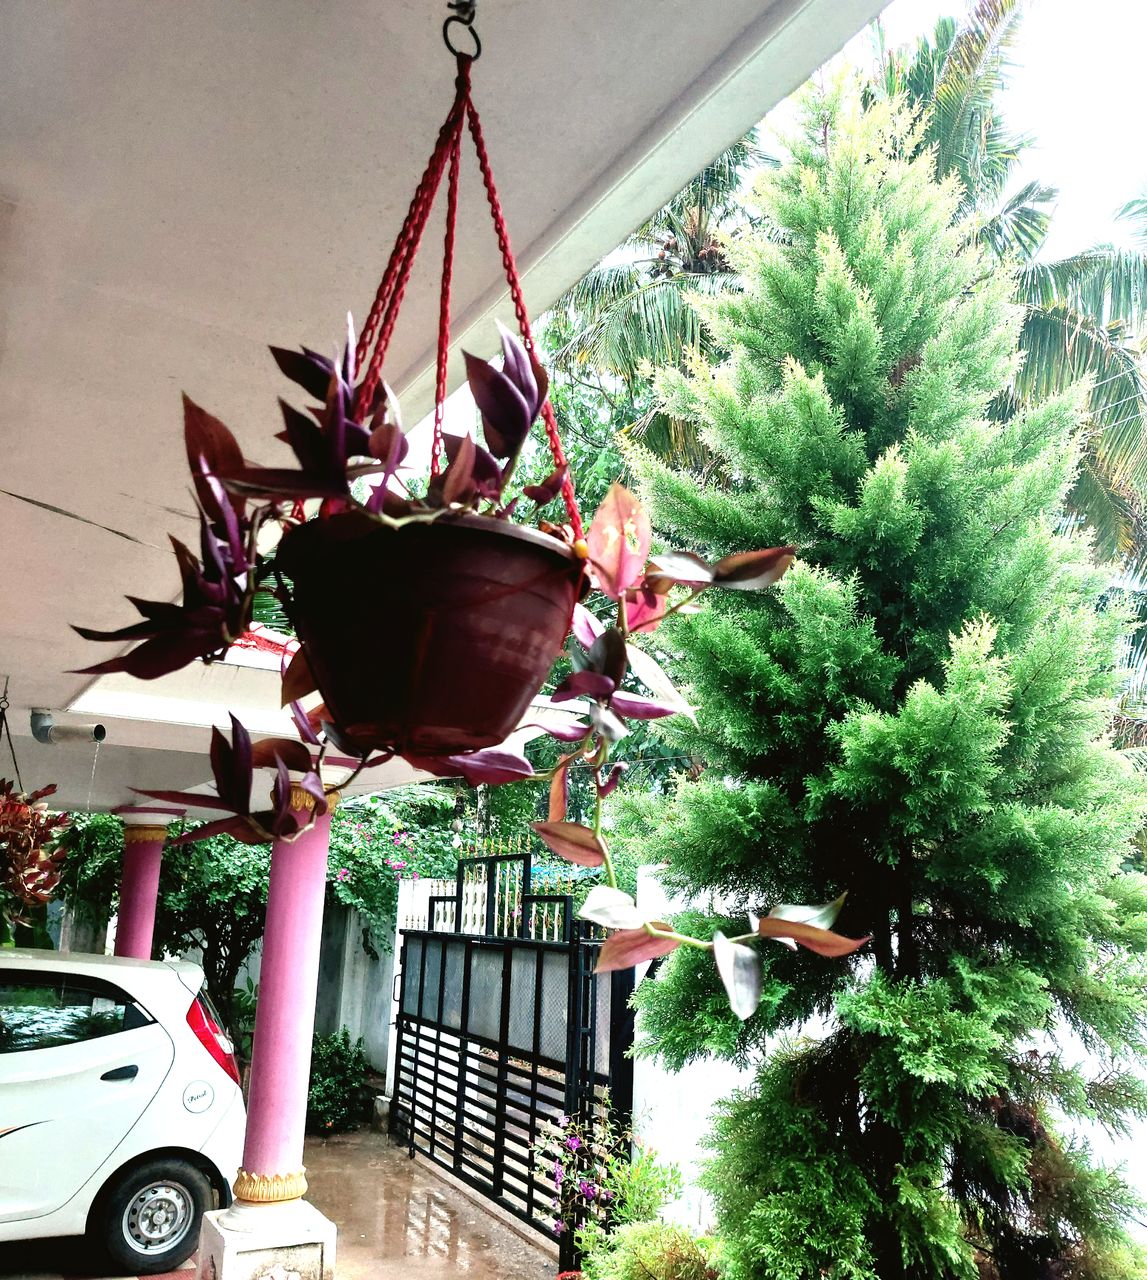 plant, tree, nature, flower, architecture, decoration, vehicle, built structure, no people, growth, mode of transportation, day, car, building exterior, motor vehicle, christmas tree, christmas, hanging, celebration, outdoors, transportation, green, potted plant, land vehicle